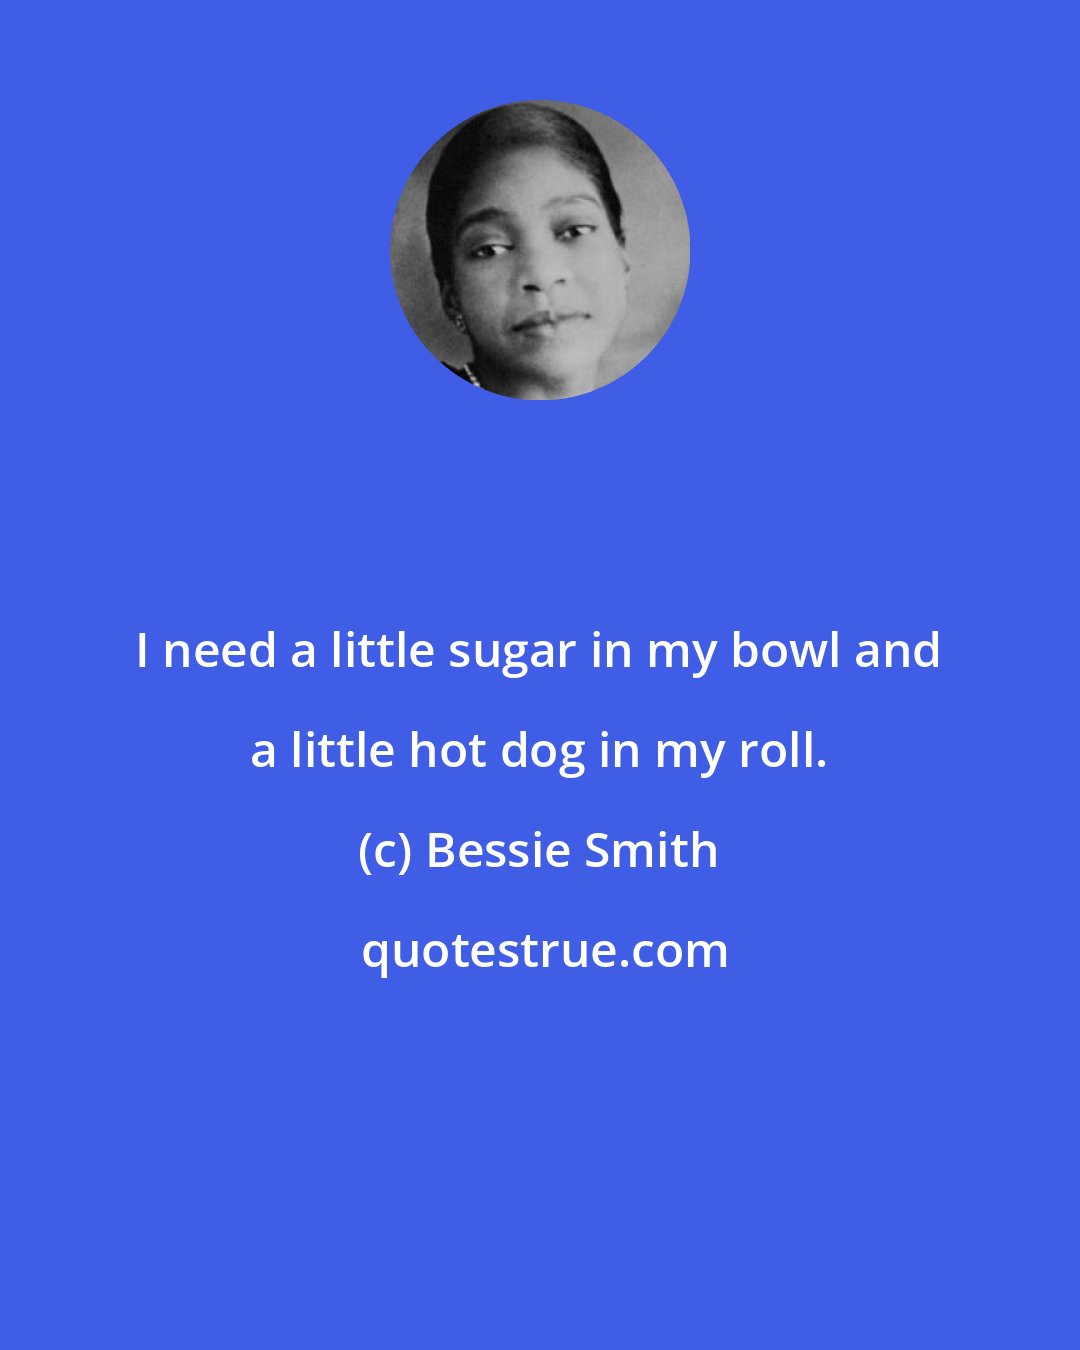 Bessie Smith: I need a little sugar in my bowl and a little hot dog in my roll.